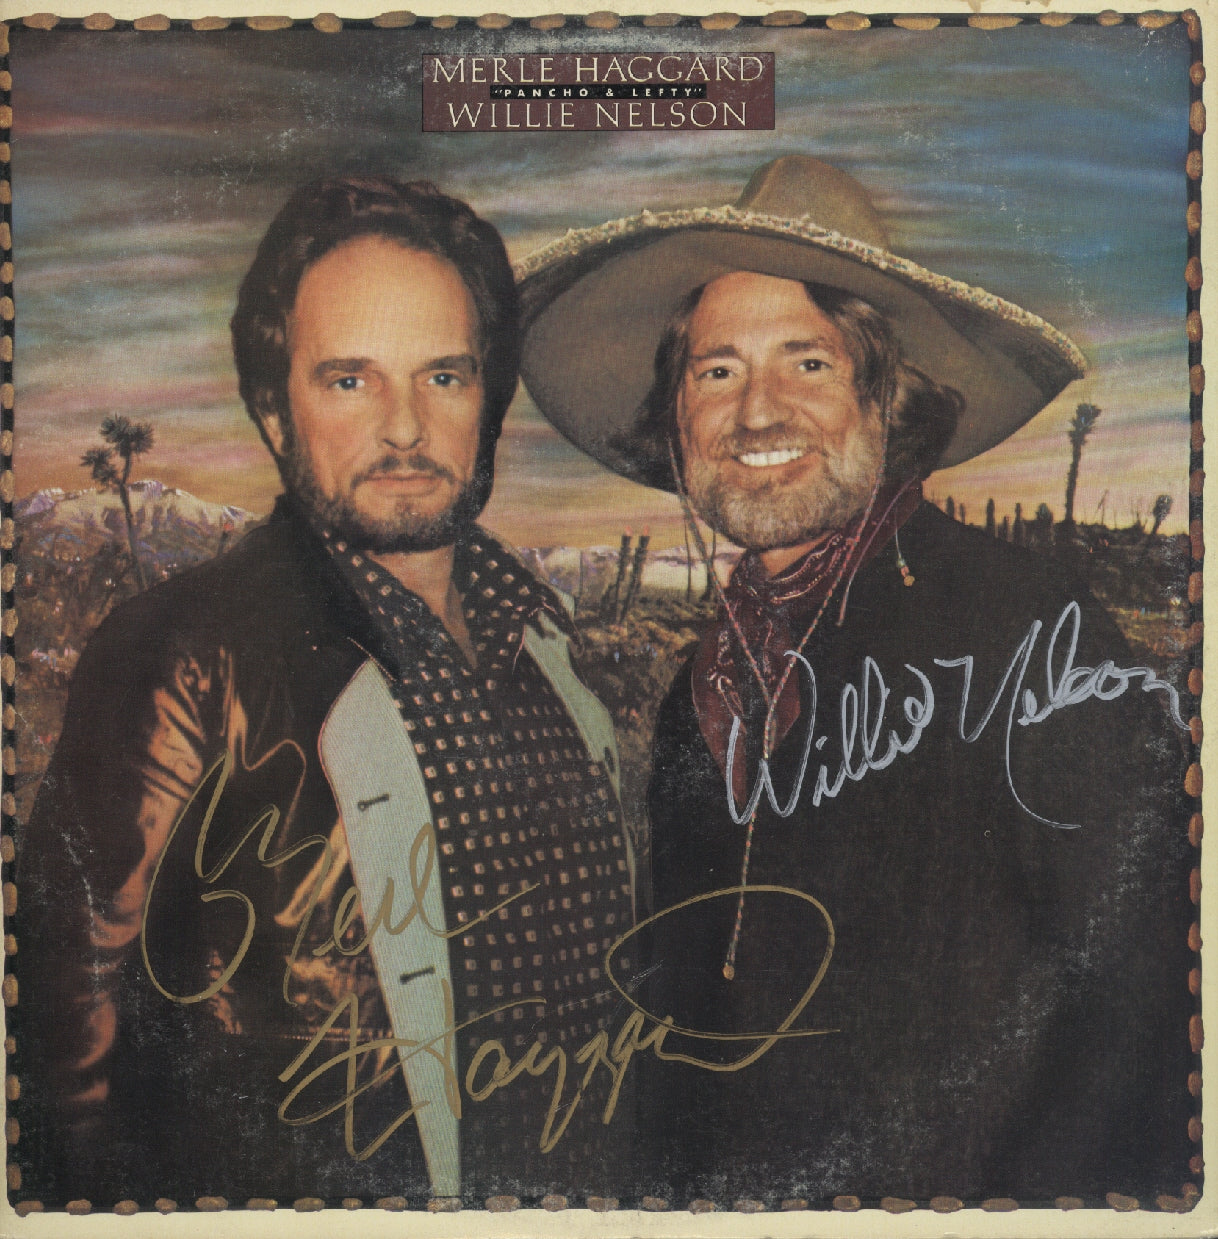 Mearl Haggard & Willie Nelson Autographed LP - Zion Graphic Collectibles